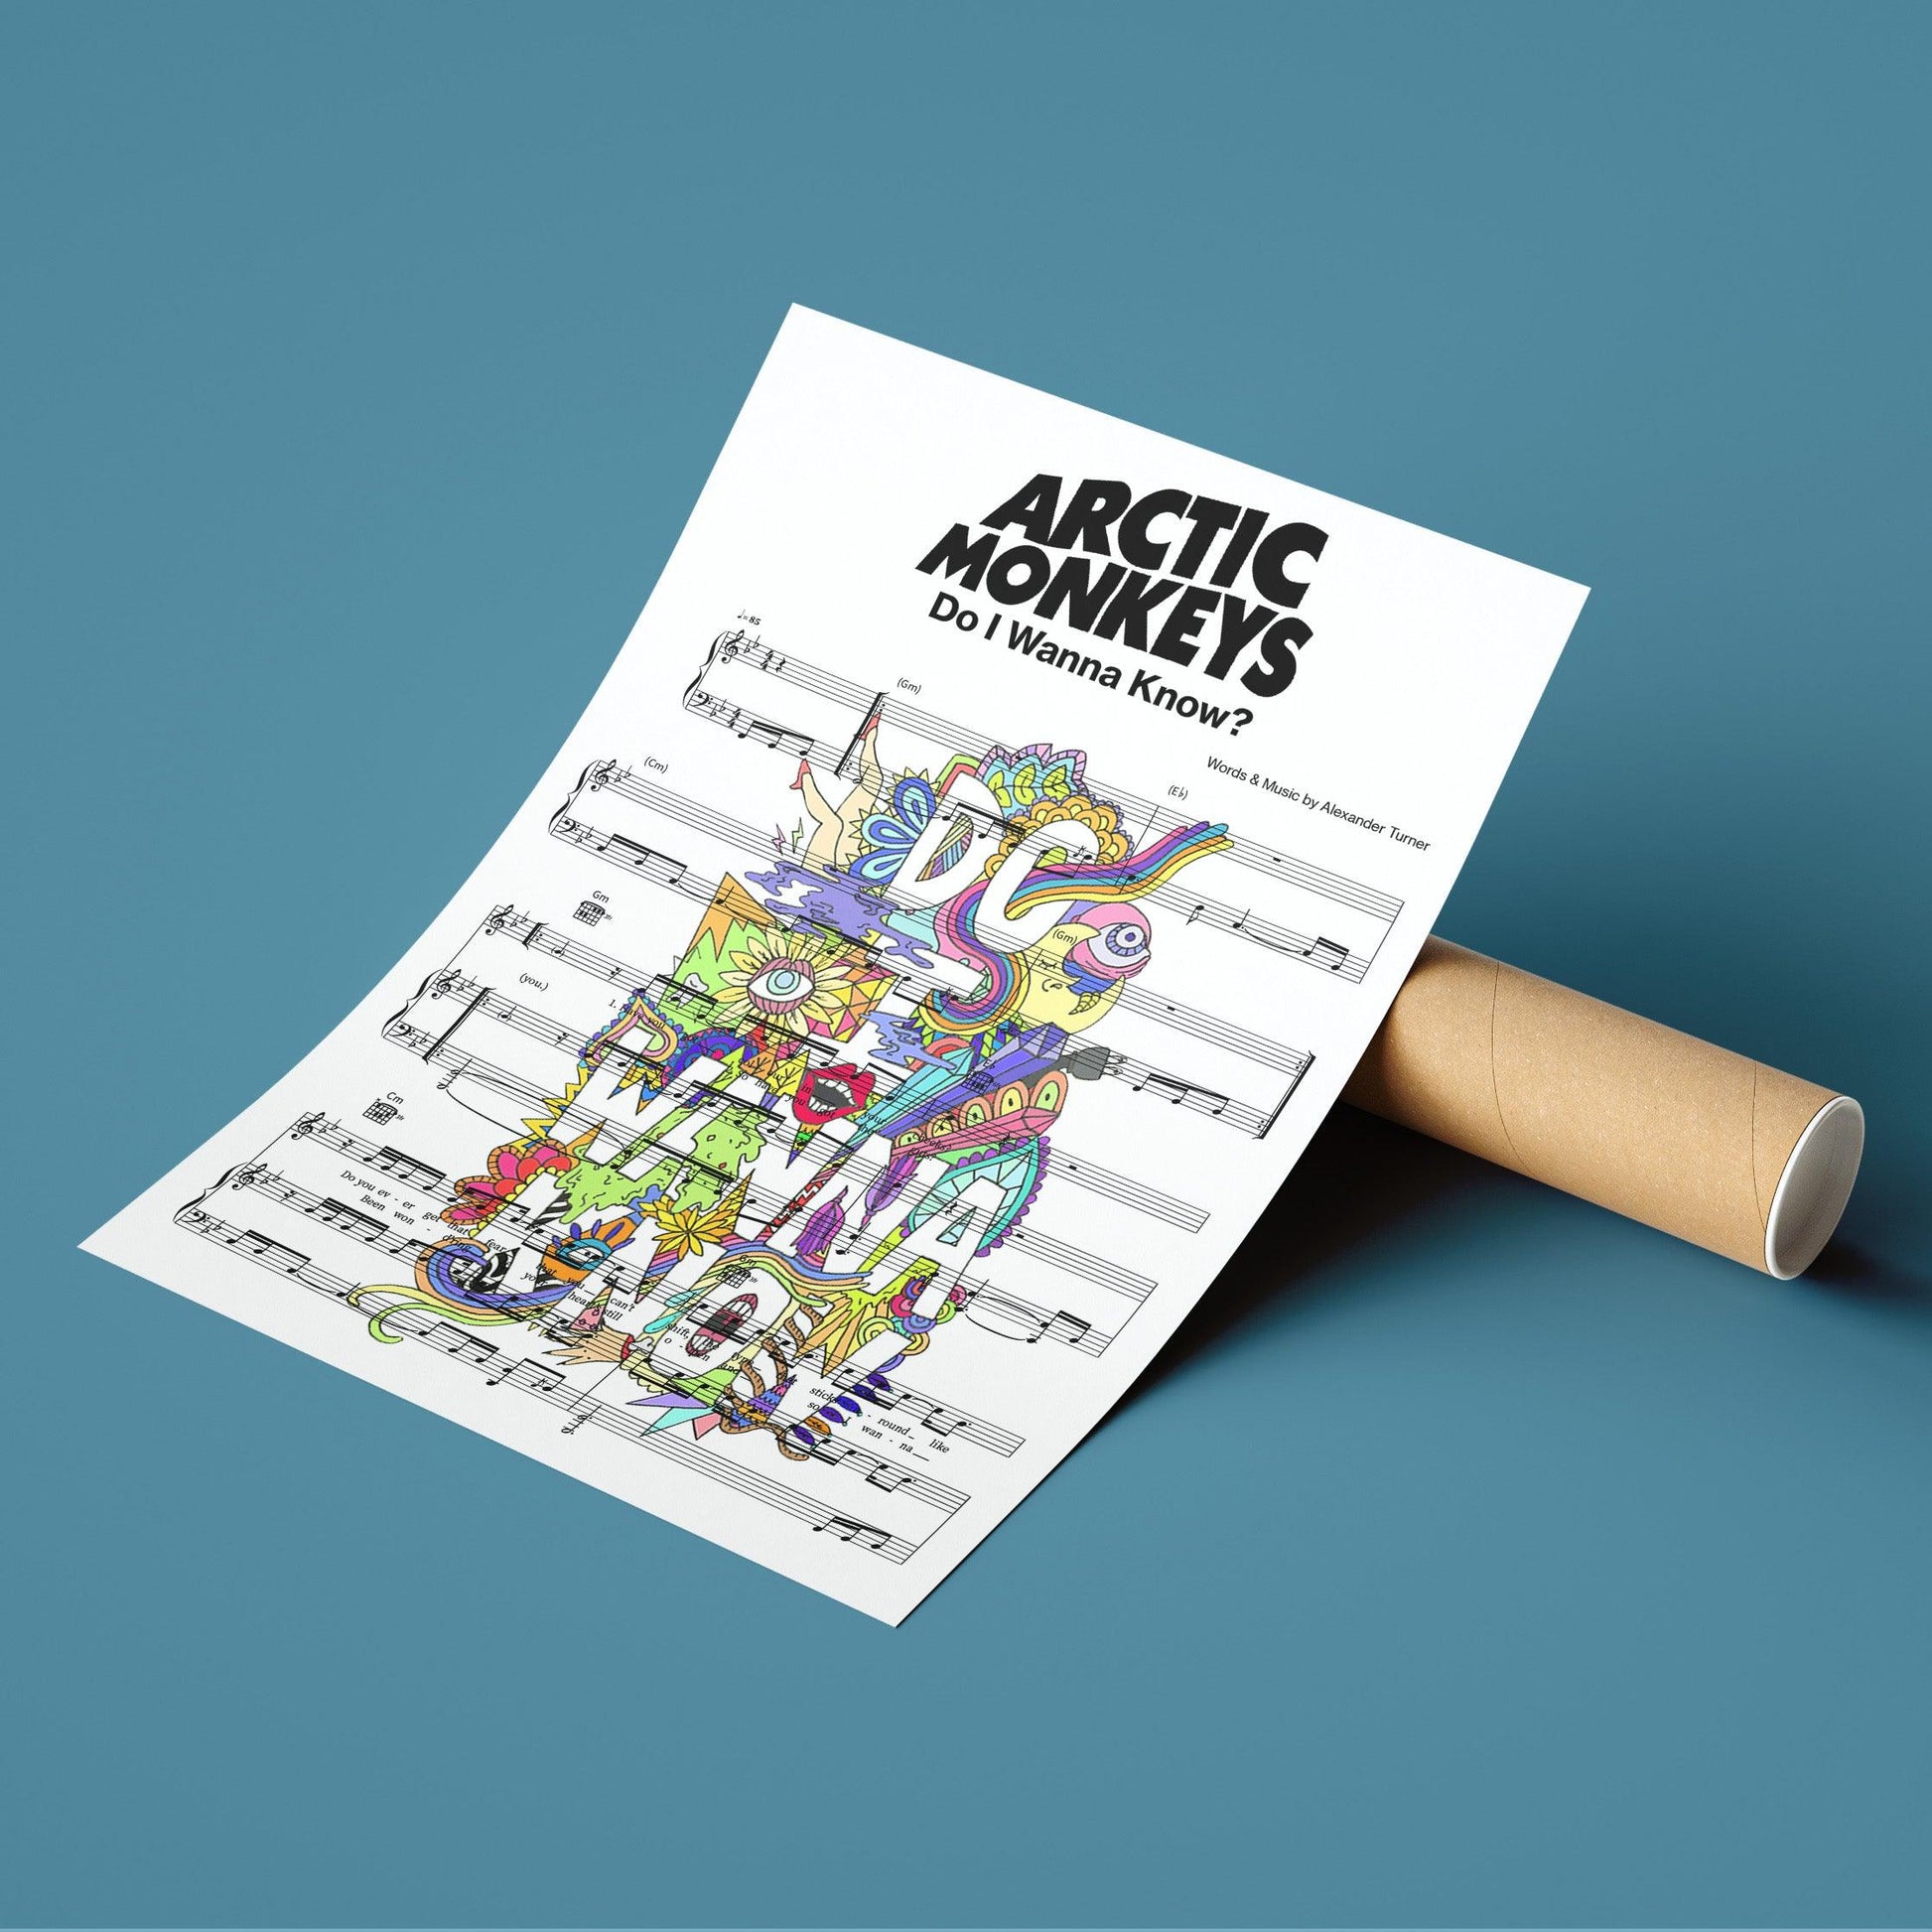 Arctic monkeys - Do i wanna know Poster | Song Music Sheet Notes Print Everyone has a favorite song especially Arctic monkeys Print, and now you can show the score as printed staff. The personal favorite song sheet print shows the song chosen as the score. 